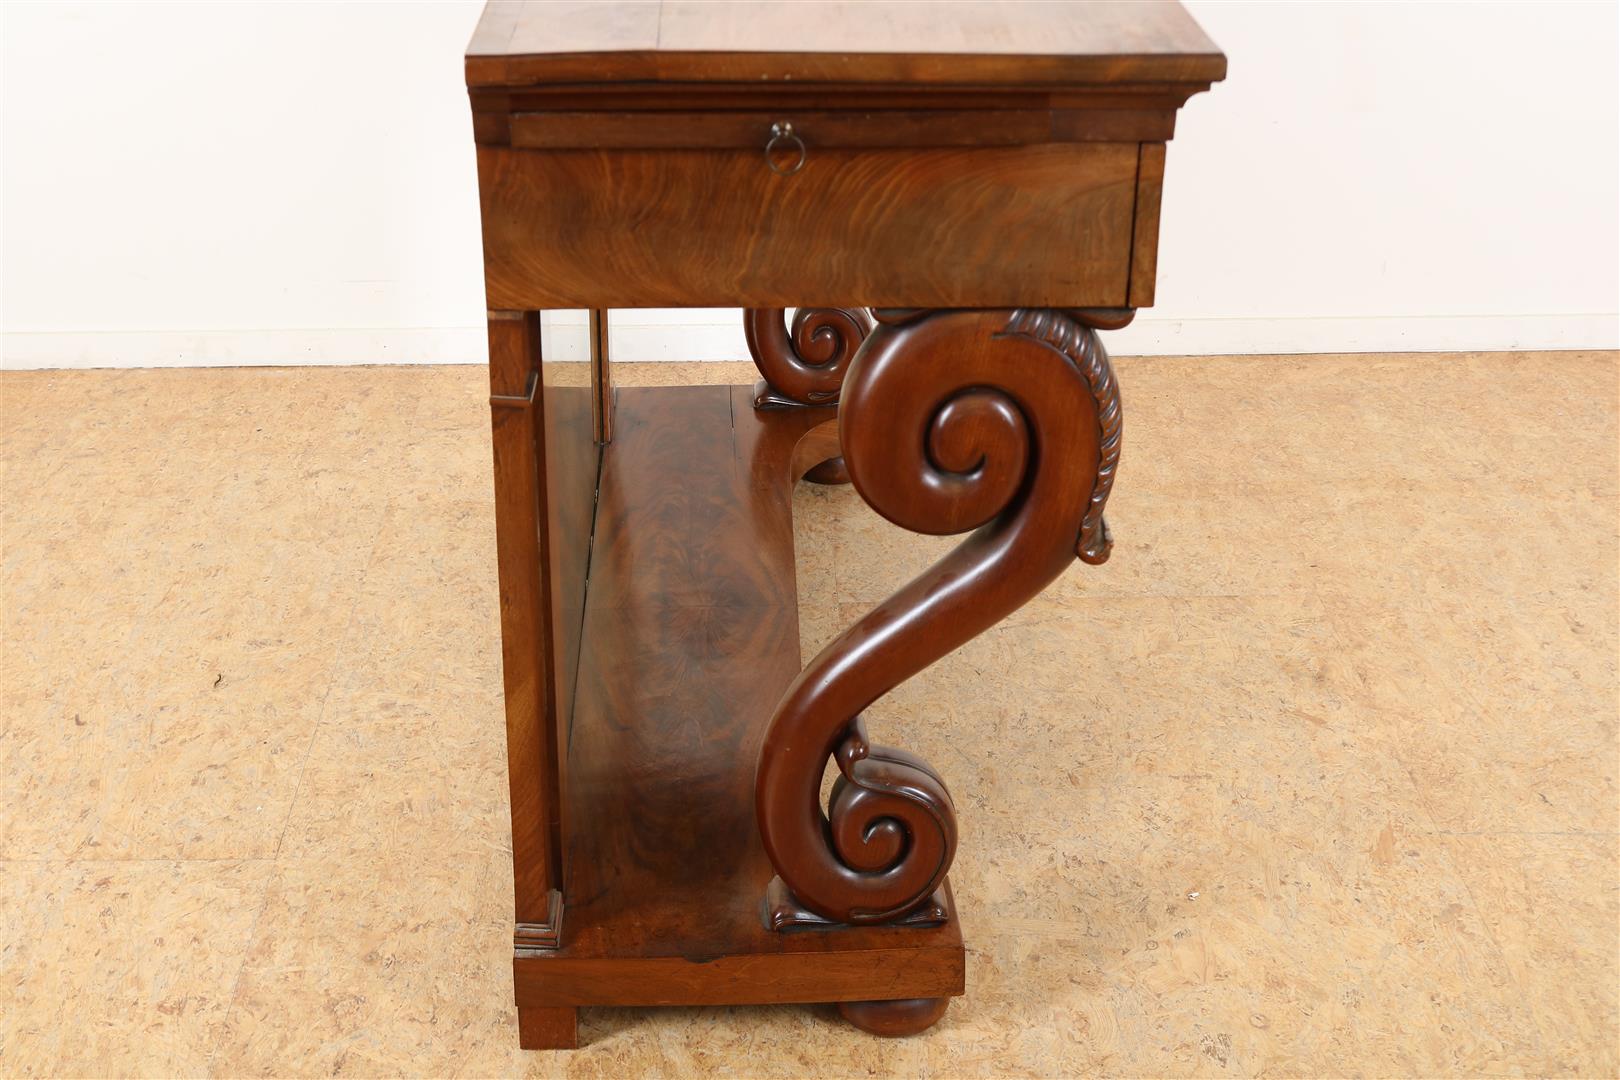 Mahogany Empire trumeau with plinth drawer on volutes with carved acanthus leaves, 2 side leaves and - Image 8 of 8